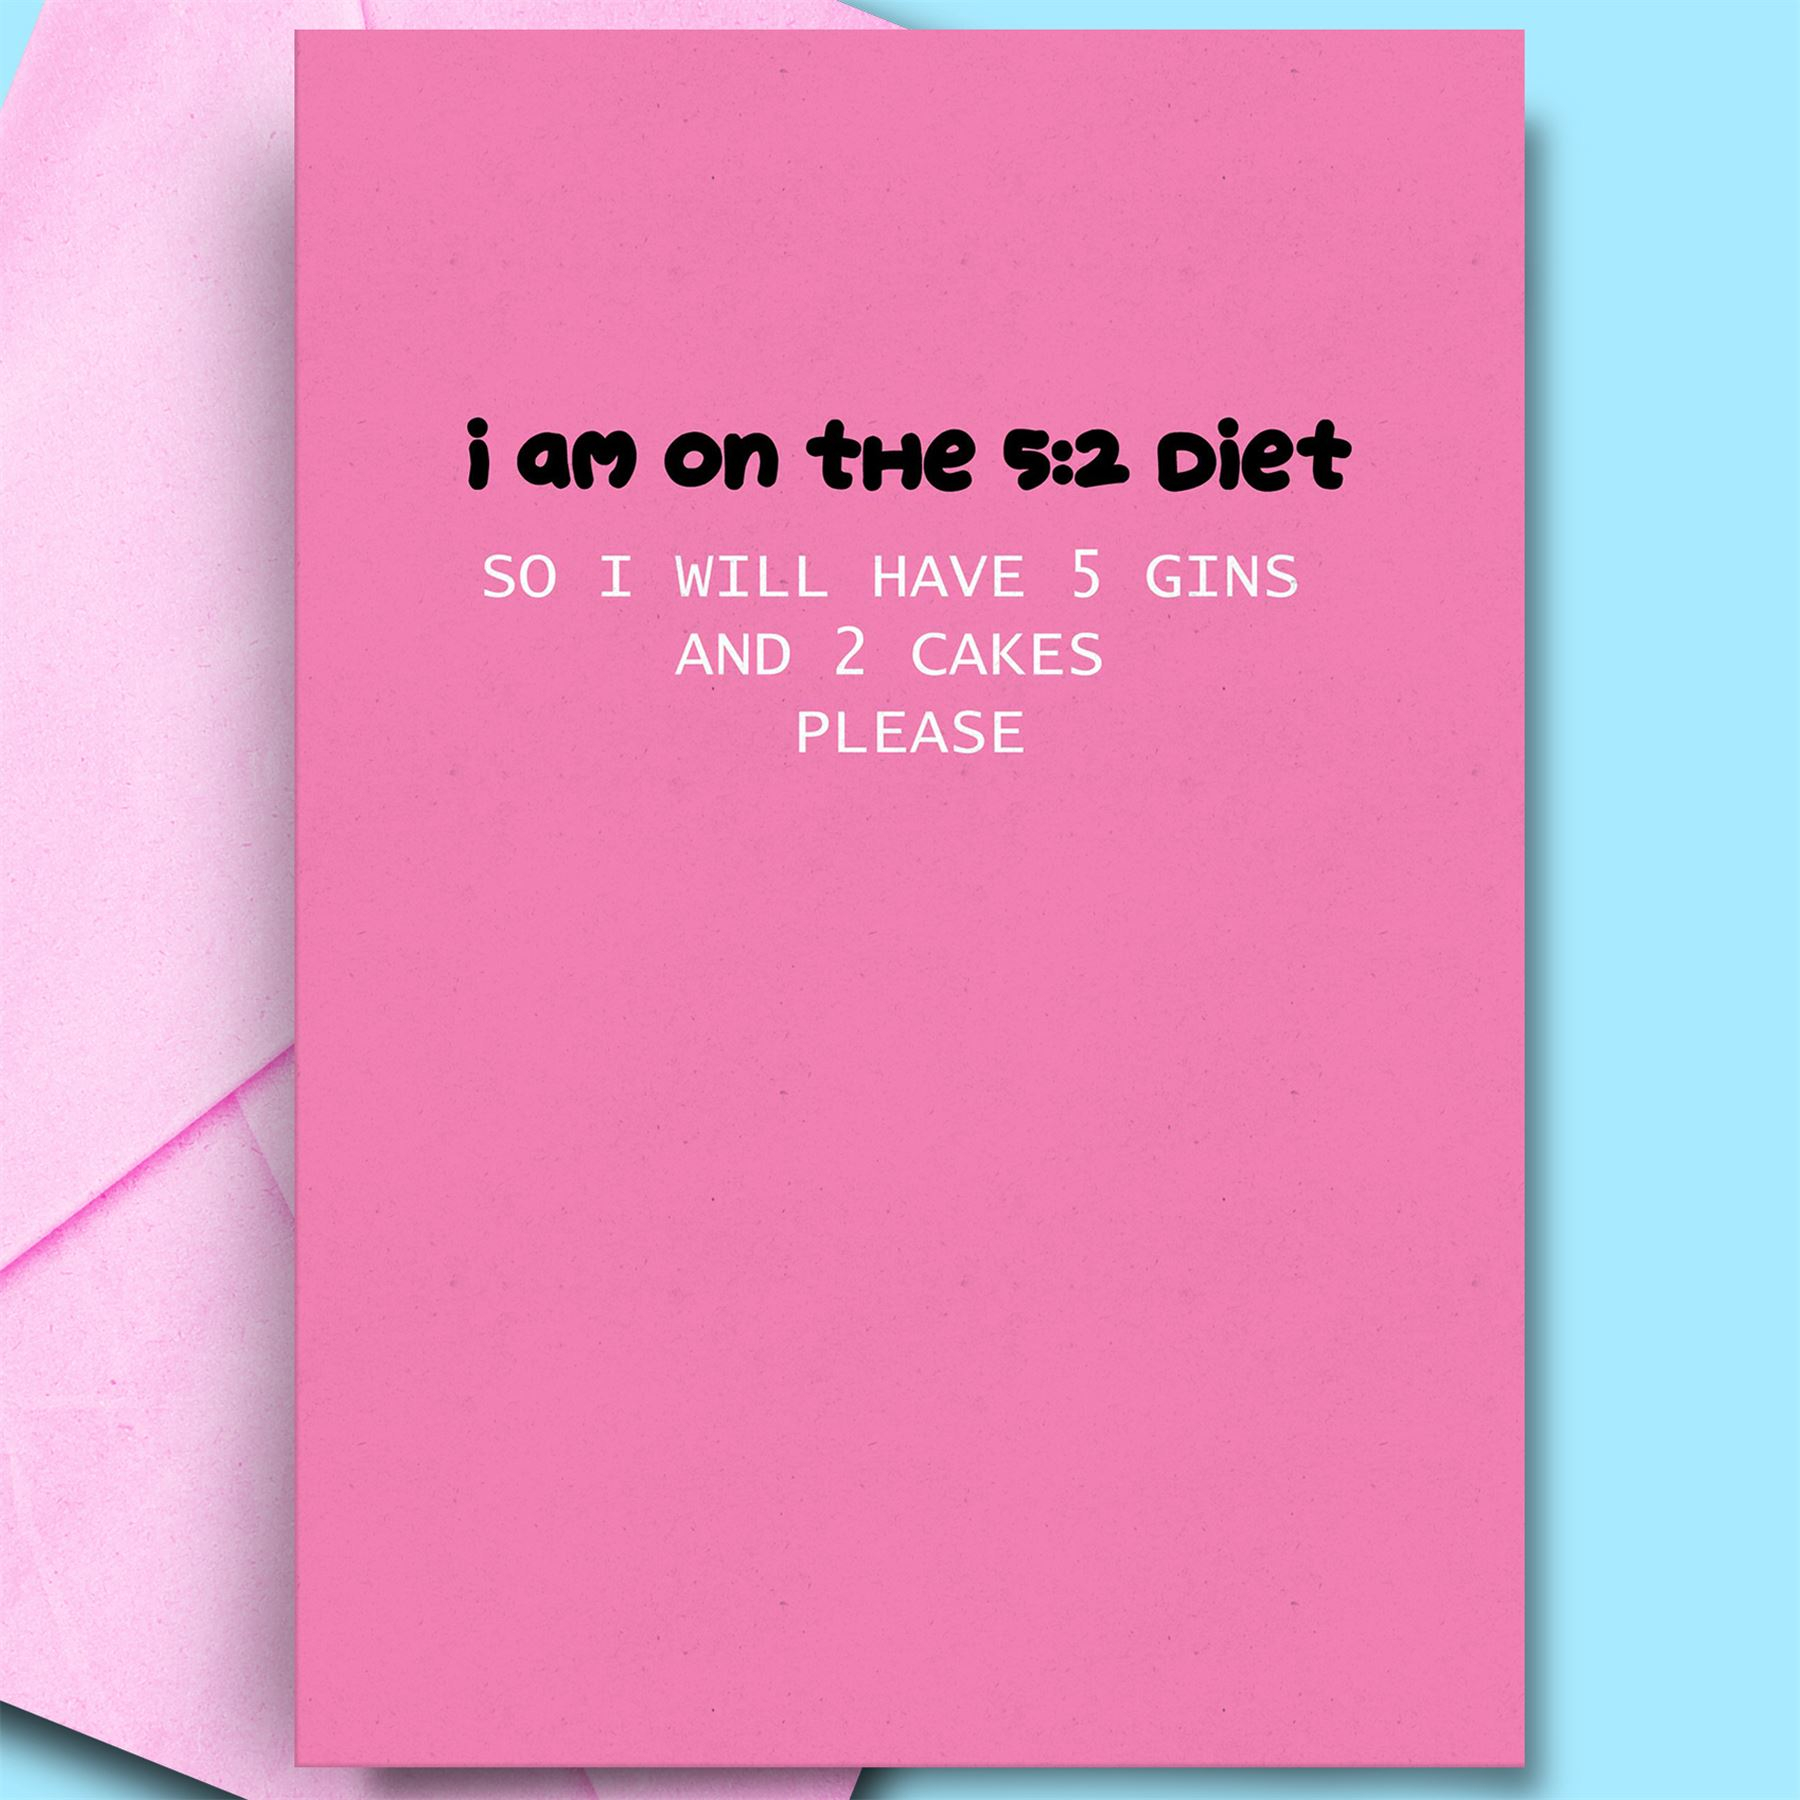 Birthday Card Ideas For Brother Gin And Tonic Gin Related Gifts Gift Ideas For Gin Humour Birthday